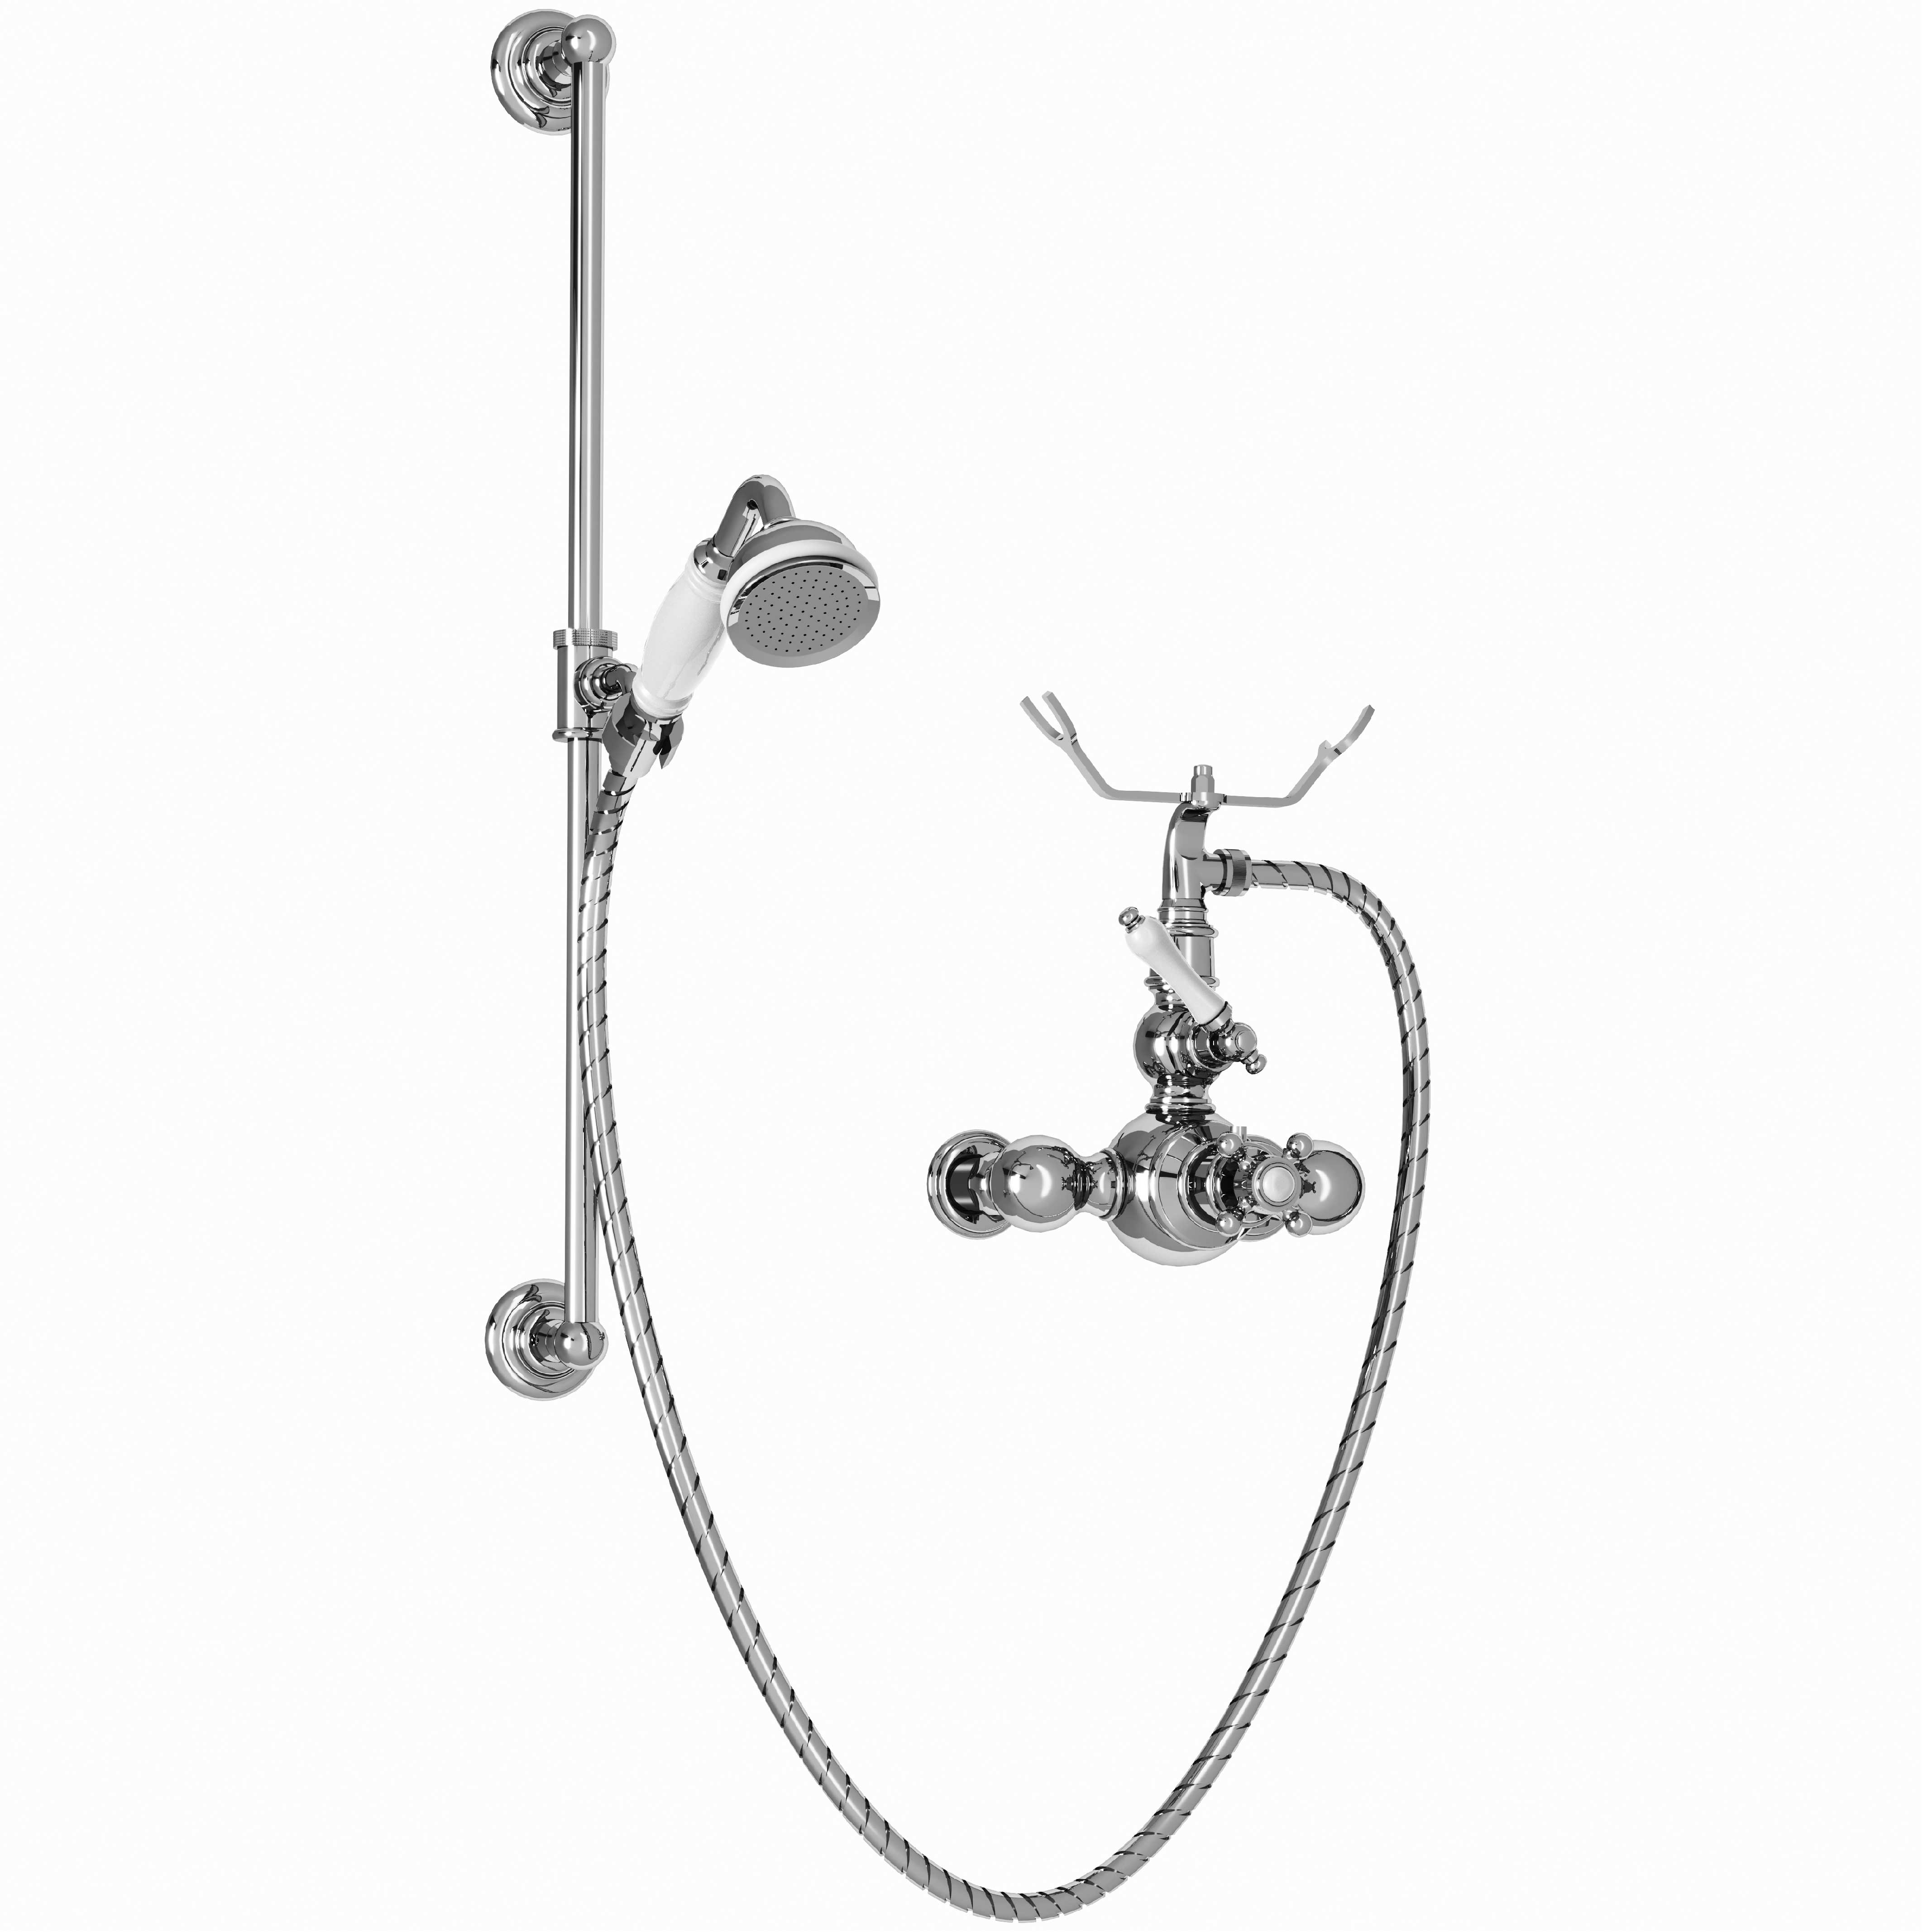 M20-2202T Thermo. shower mixer with sliding bar